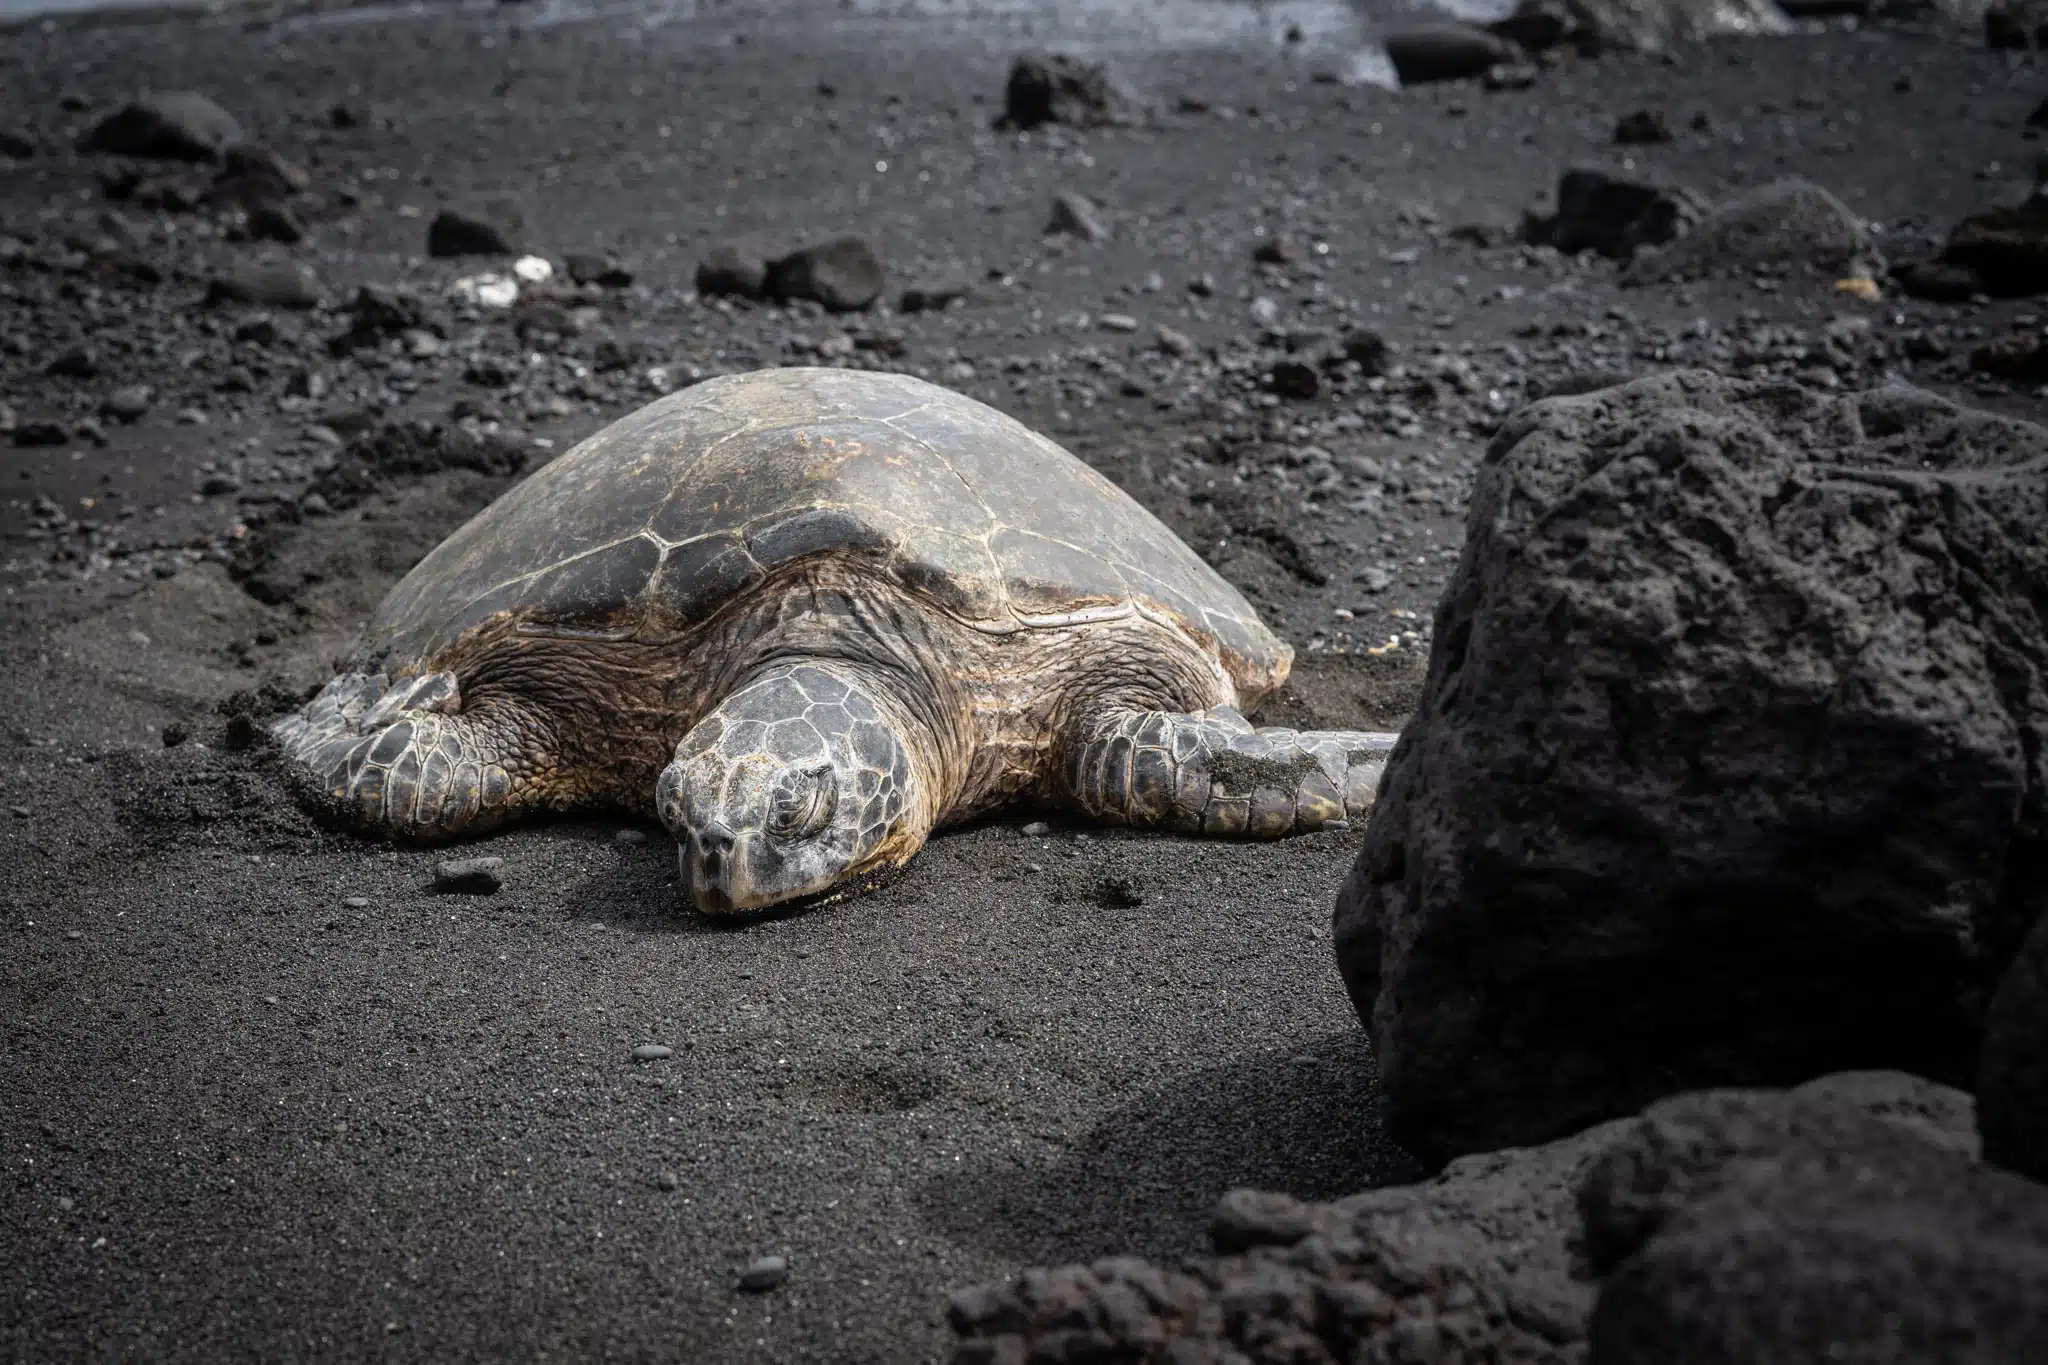 Hawaiian Sea Turtles: Species, Conservation, and How to Respect Them